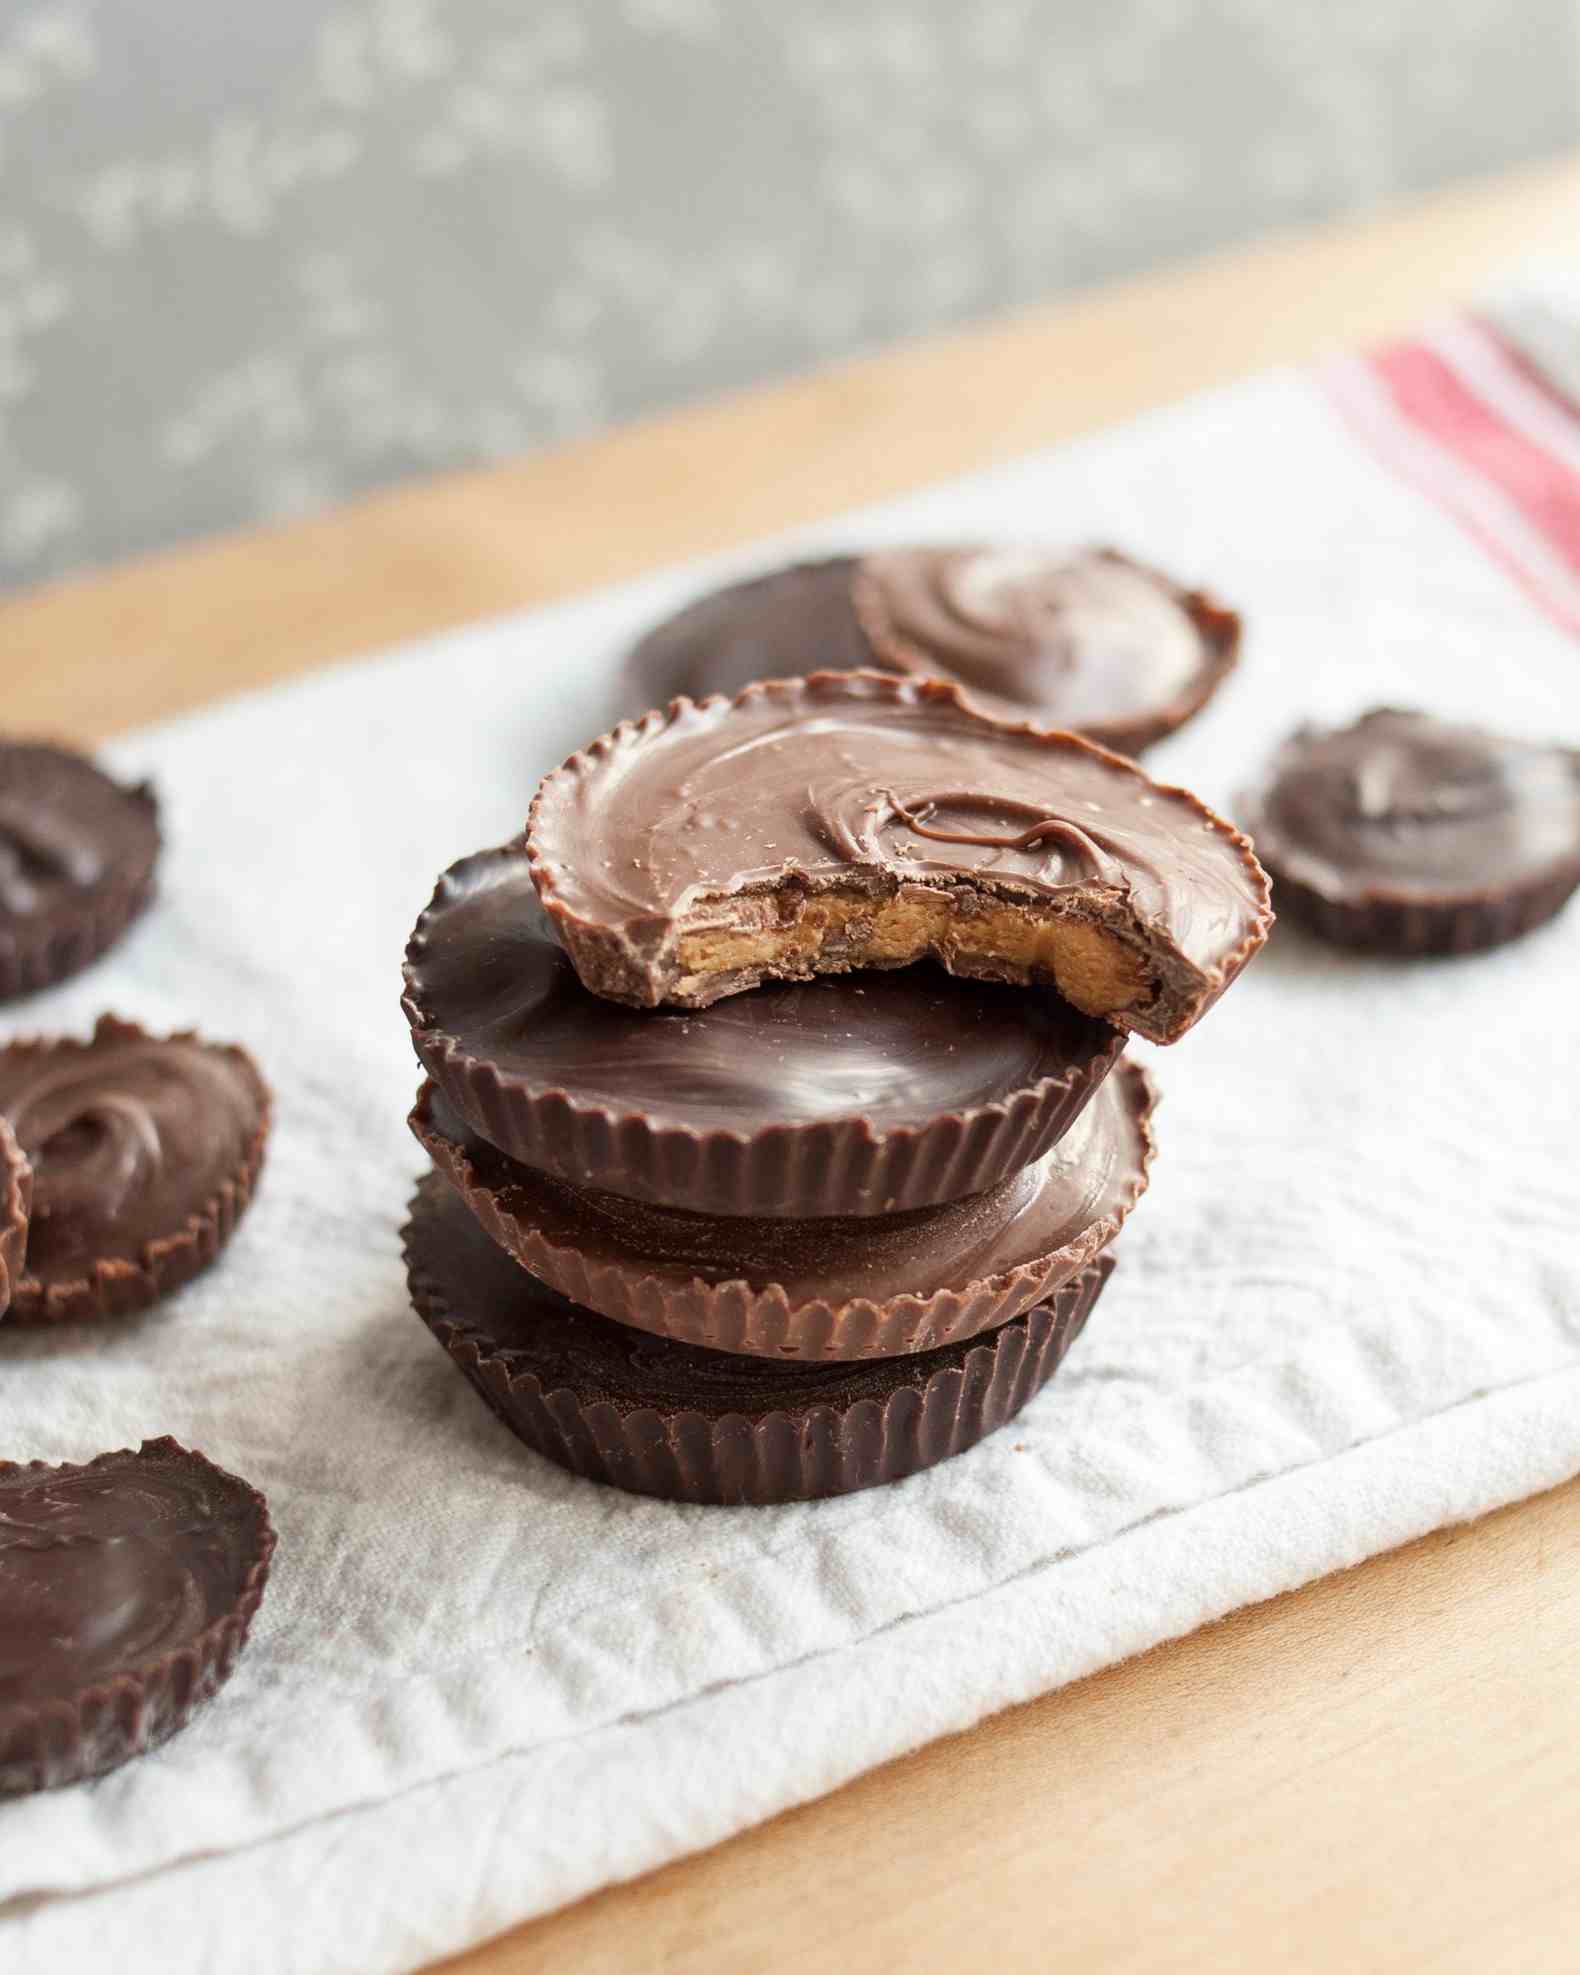 Peanut butter cups with chocolate recipes are nut butter healthy